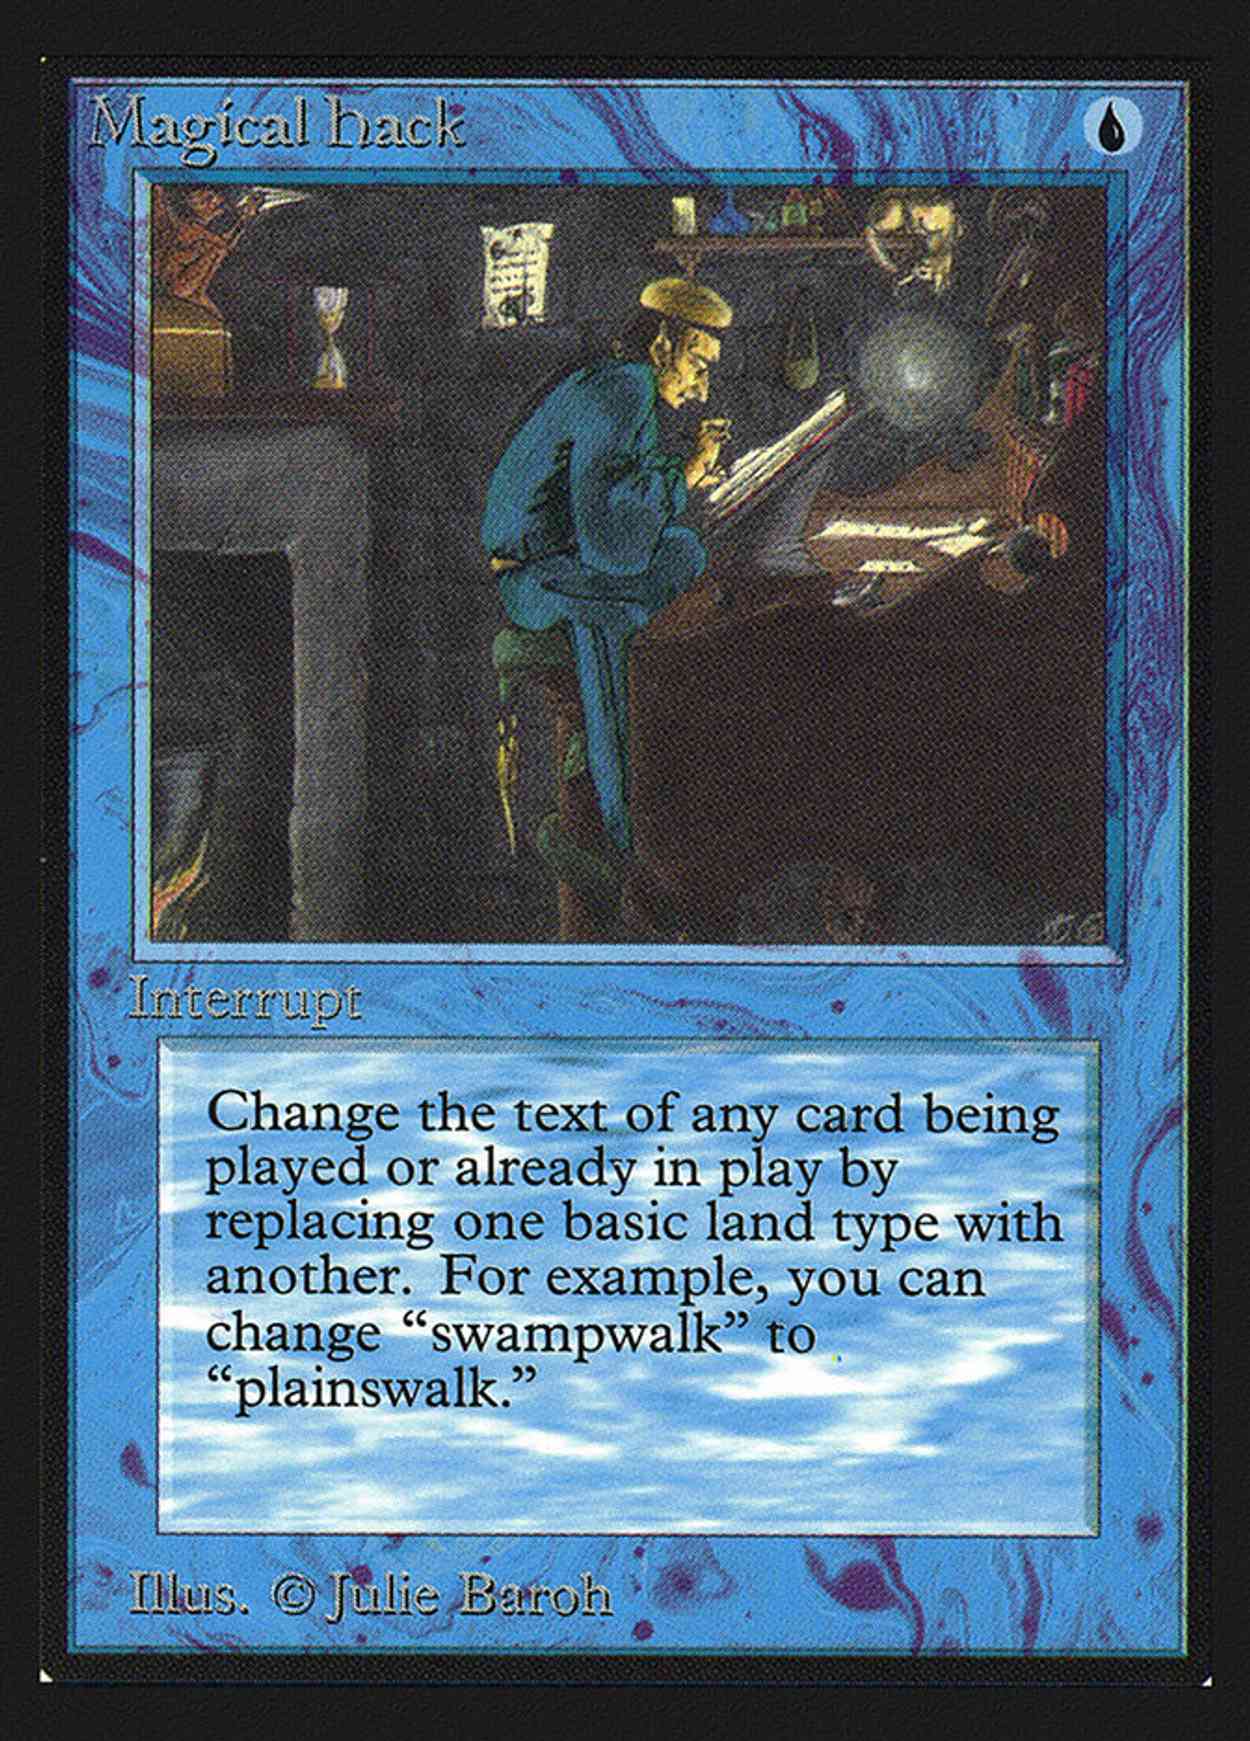 Magical Hack (IE) magic card front